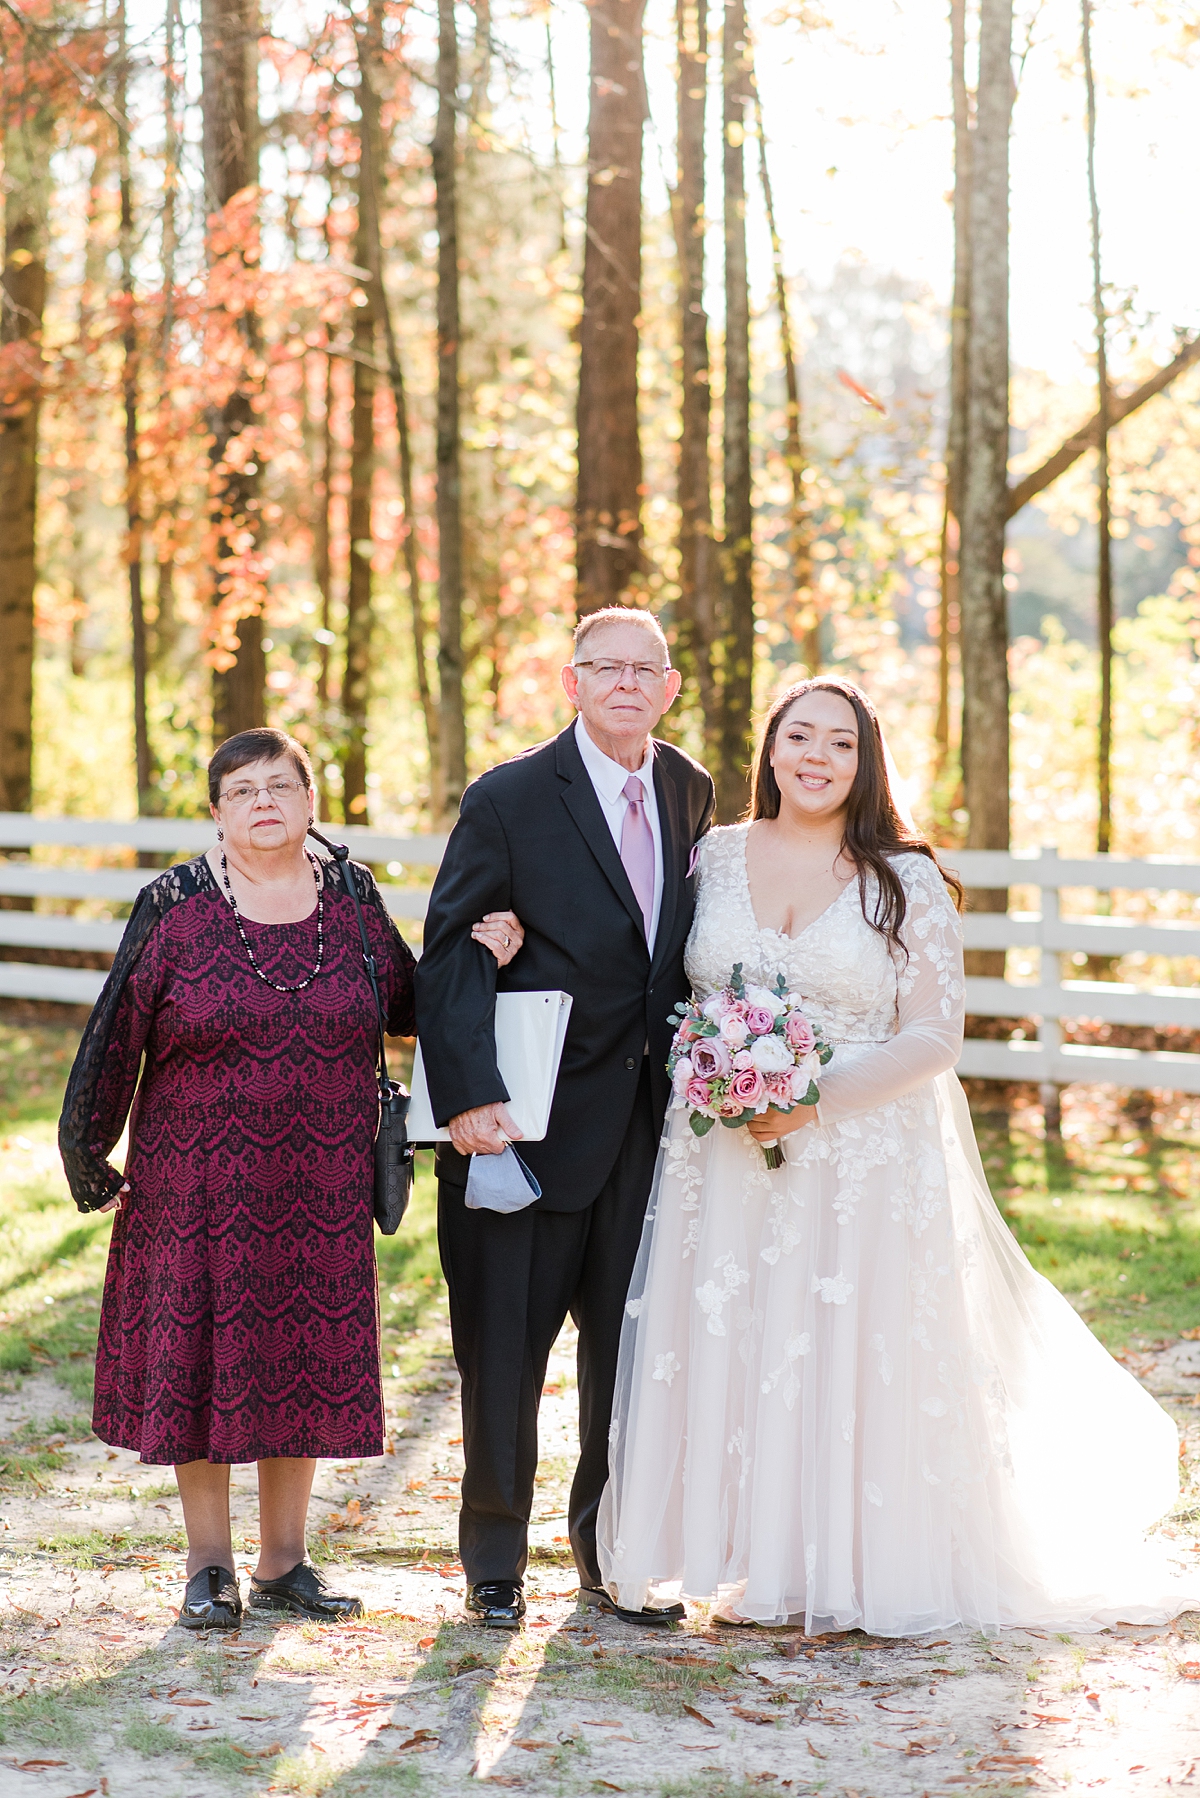 Grandparent First Look Portraits at Virginia Cliffe Inn Wedding. Wedding Photography by Richmond Wedding Photographer Kailey Brianne Photography.